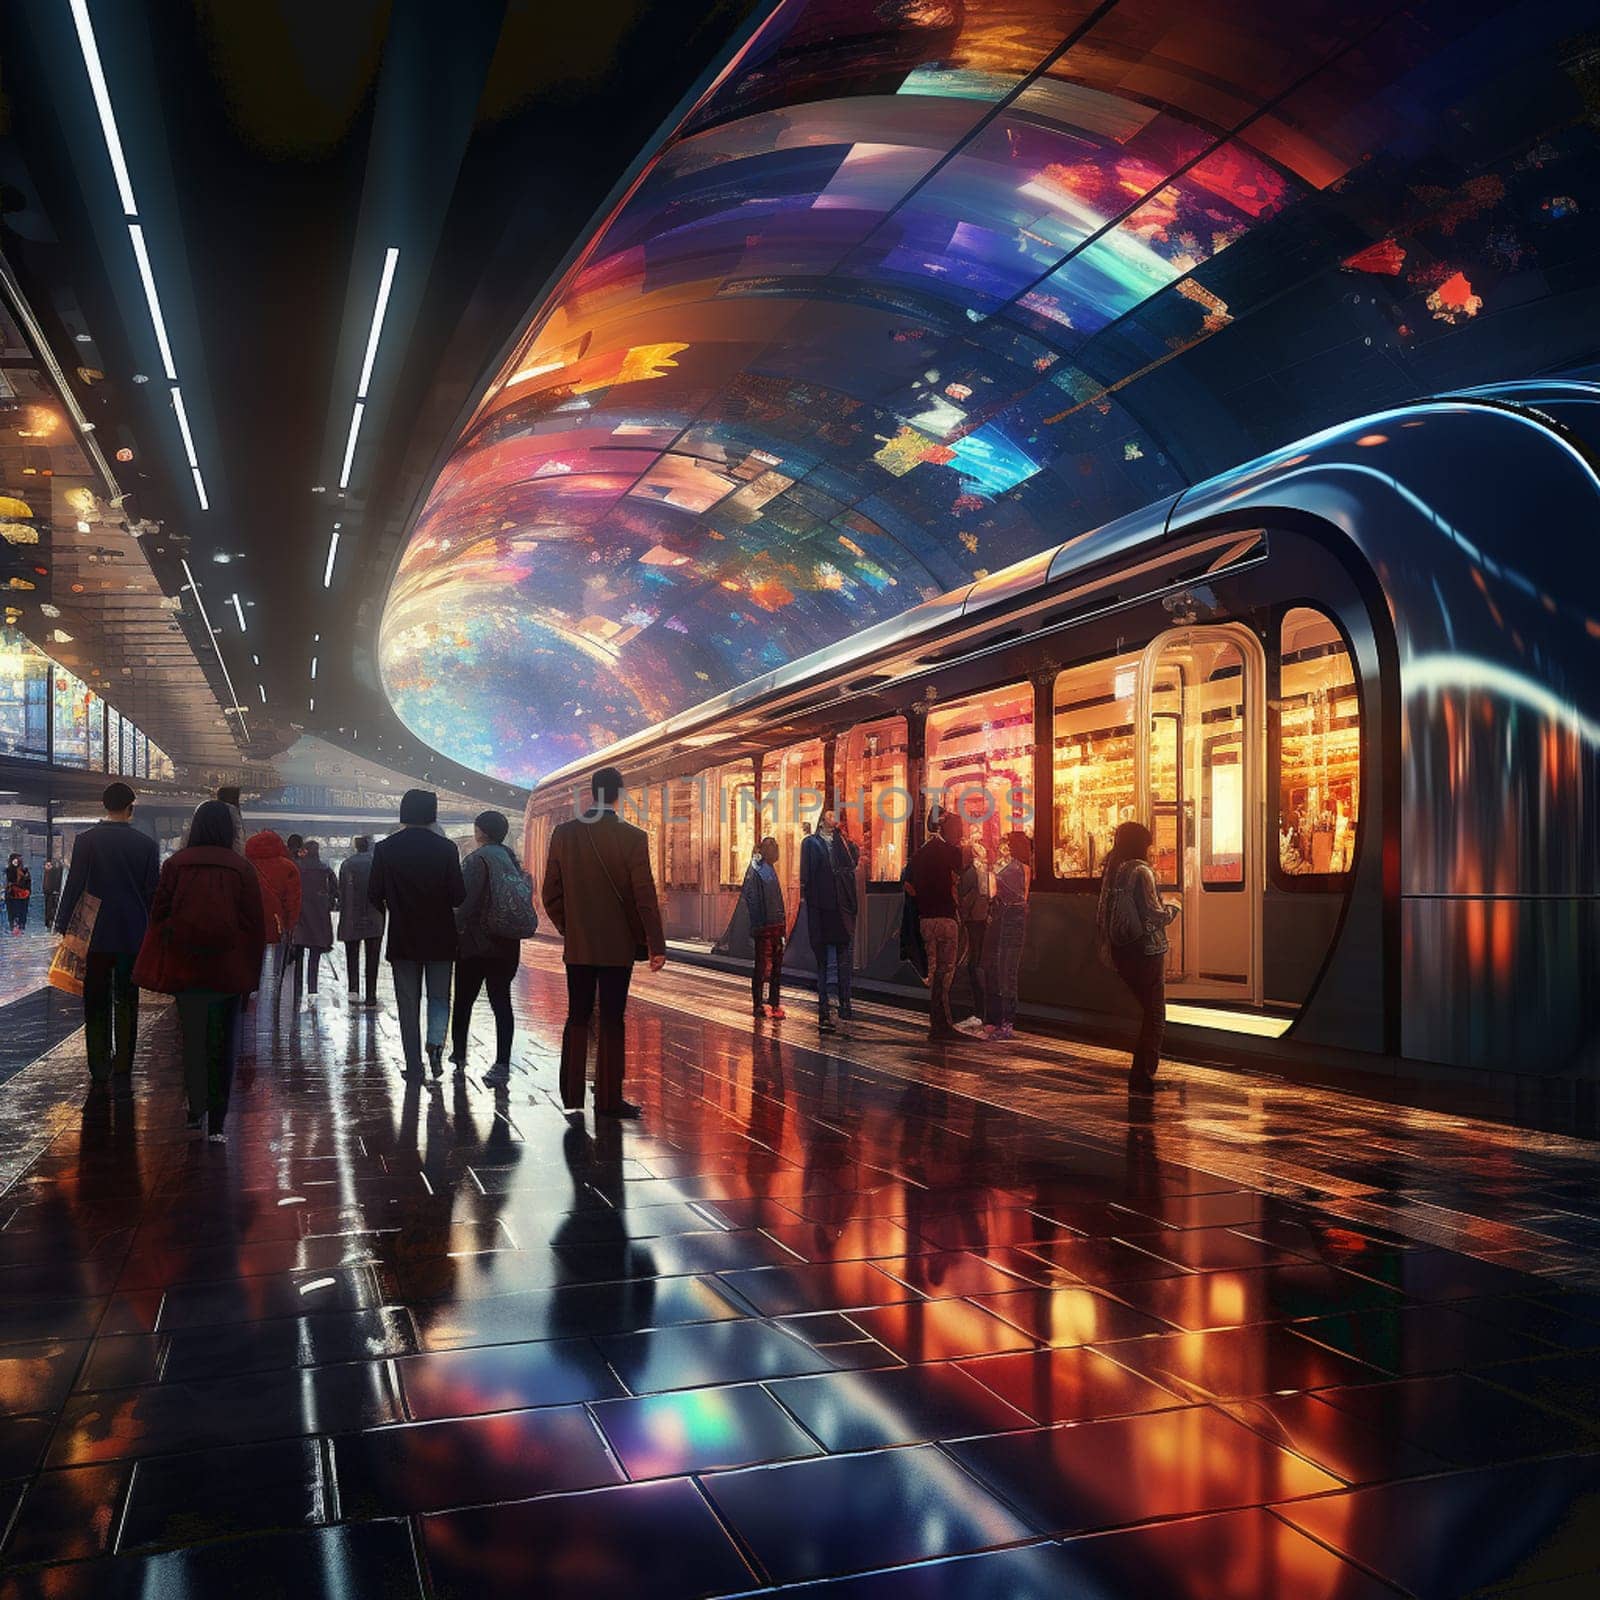 Cyberpunk subway With neon backlight contours. Retro wave style. Futuristic high-speed express passenger train. Logistics of the future, modern technologies. Concept art, Digital painting. by Andelov13